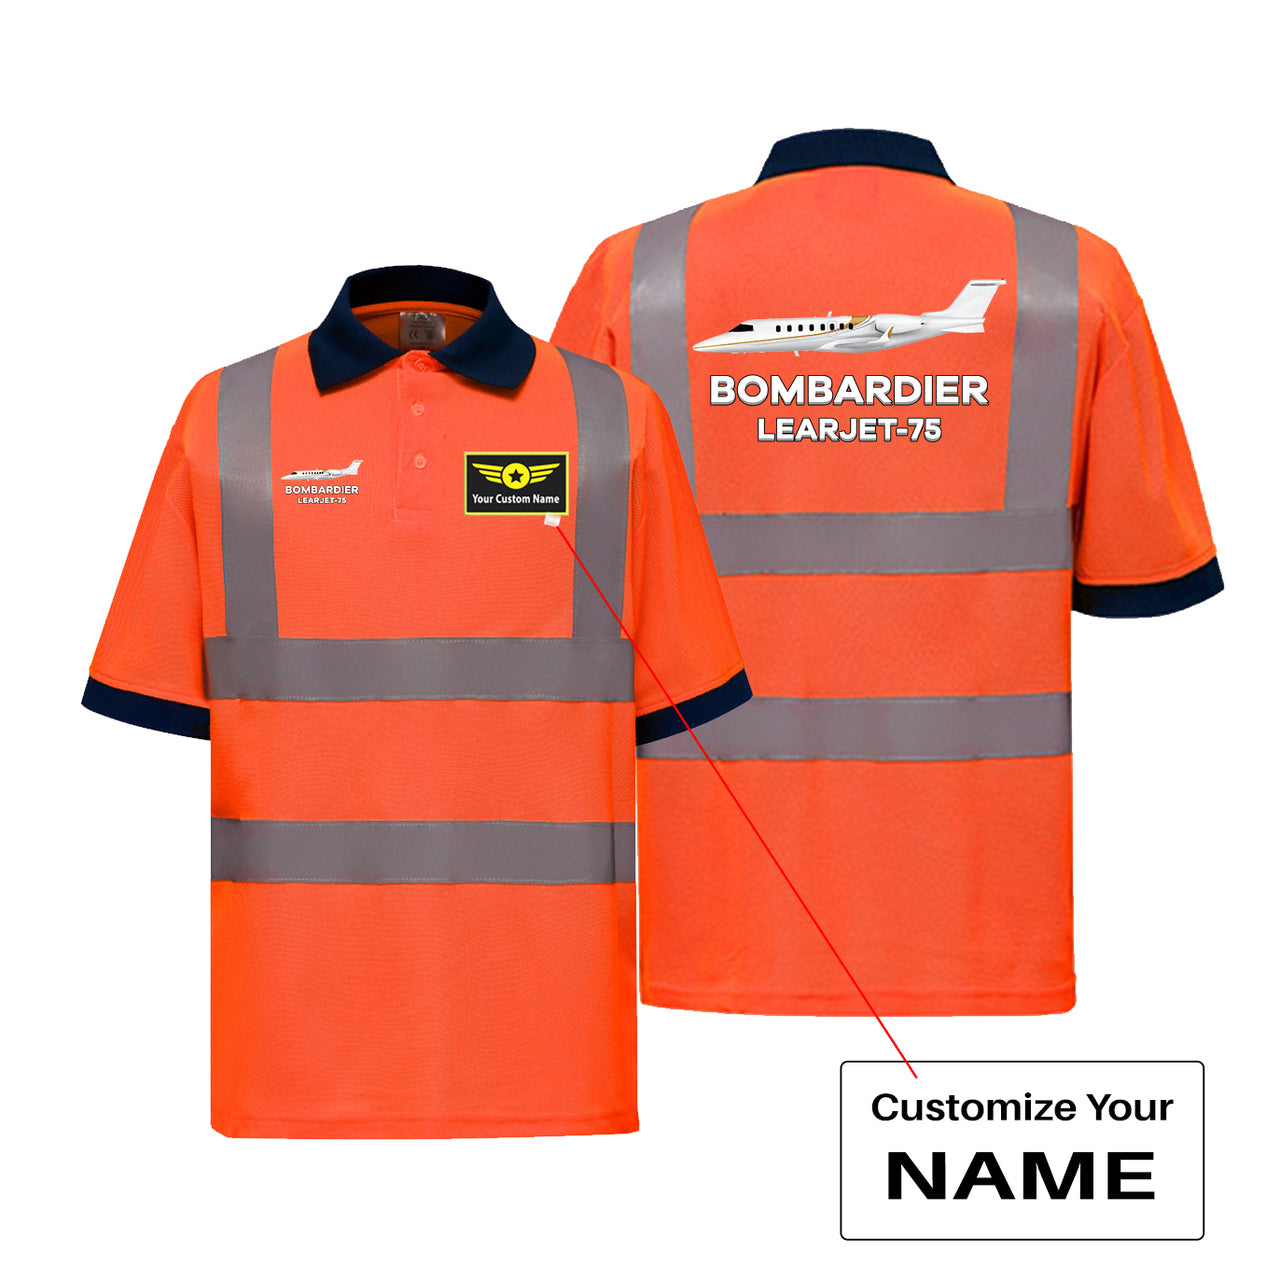 The Bombardier Learjet 75 Designed Reflective Polo T-Shirts